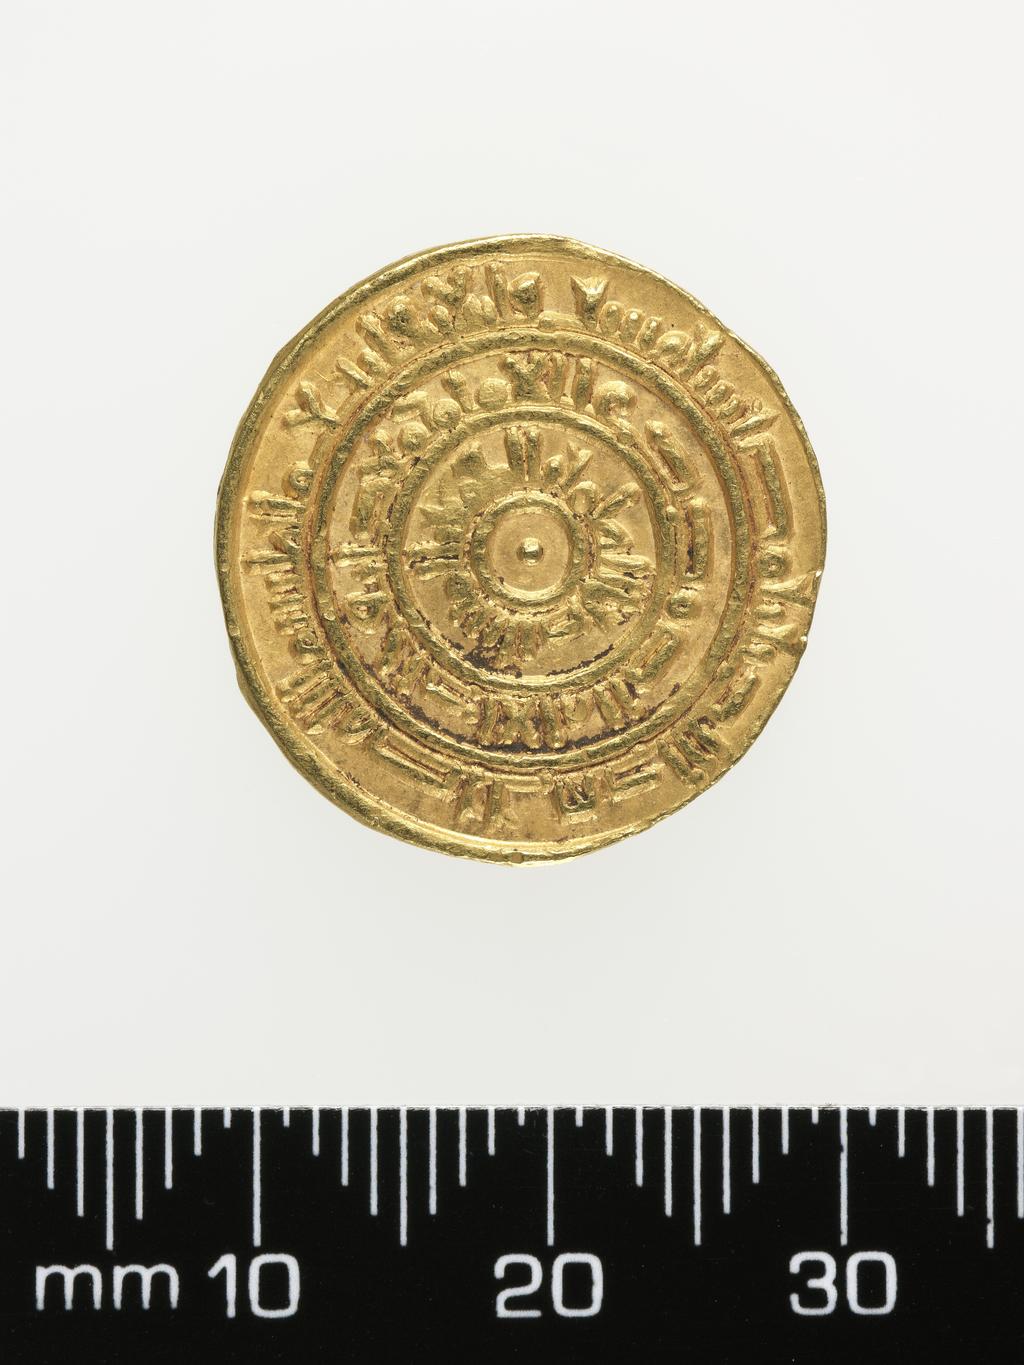 An image of Coinage. Dinar. Al-Mustansir (1036-94), ruler, Egypt. Misr mint, Egypt. Egypt and Syria. Fatimids. Obverse; Plain circle with a dot in the middle, 1st margin in plain circle, 2nd margin in plain circle, 3rd margin. Reverse; Plain circle with a dot in the middle, 1st margin in plain circle, 2nd margin in plain circle, 3rd margin. Gold, height 21 mm, width 21 mm, weight 4.17 g, 1054-1055. Islamic.